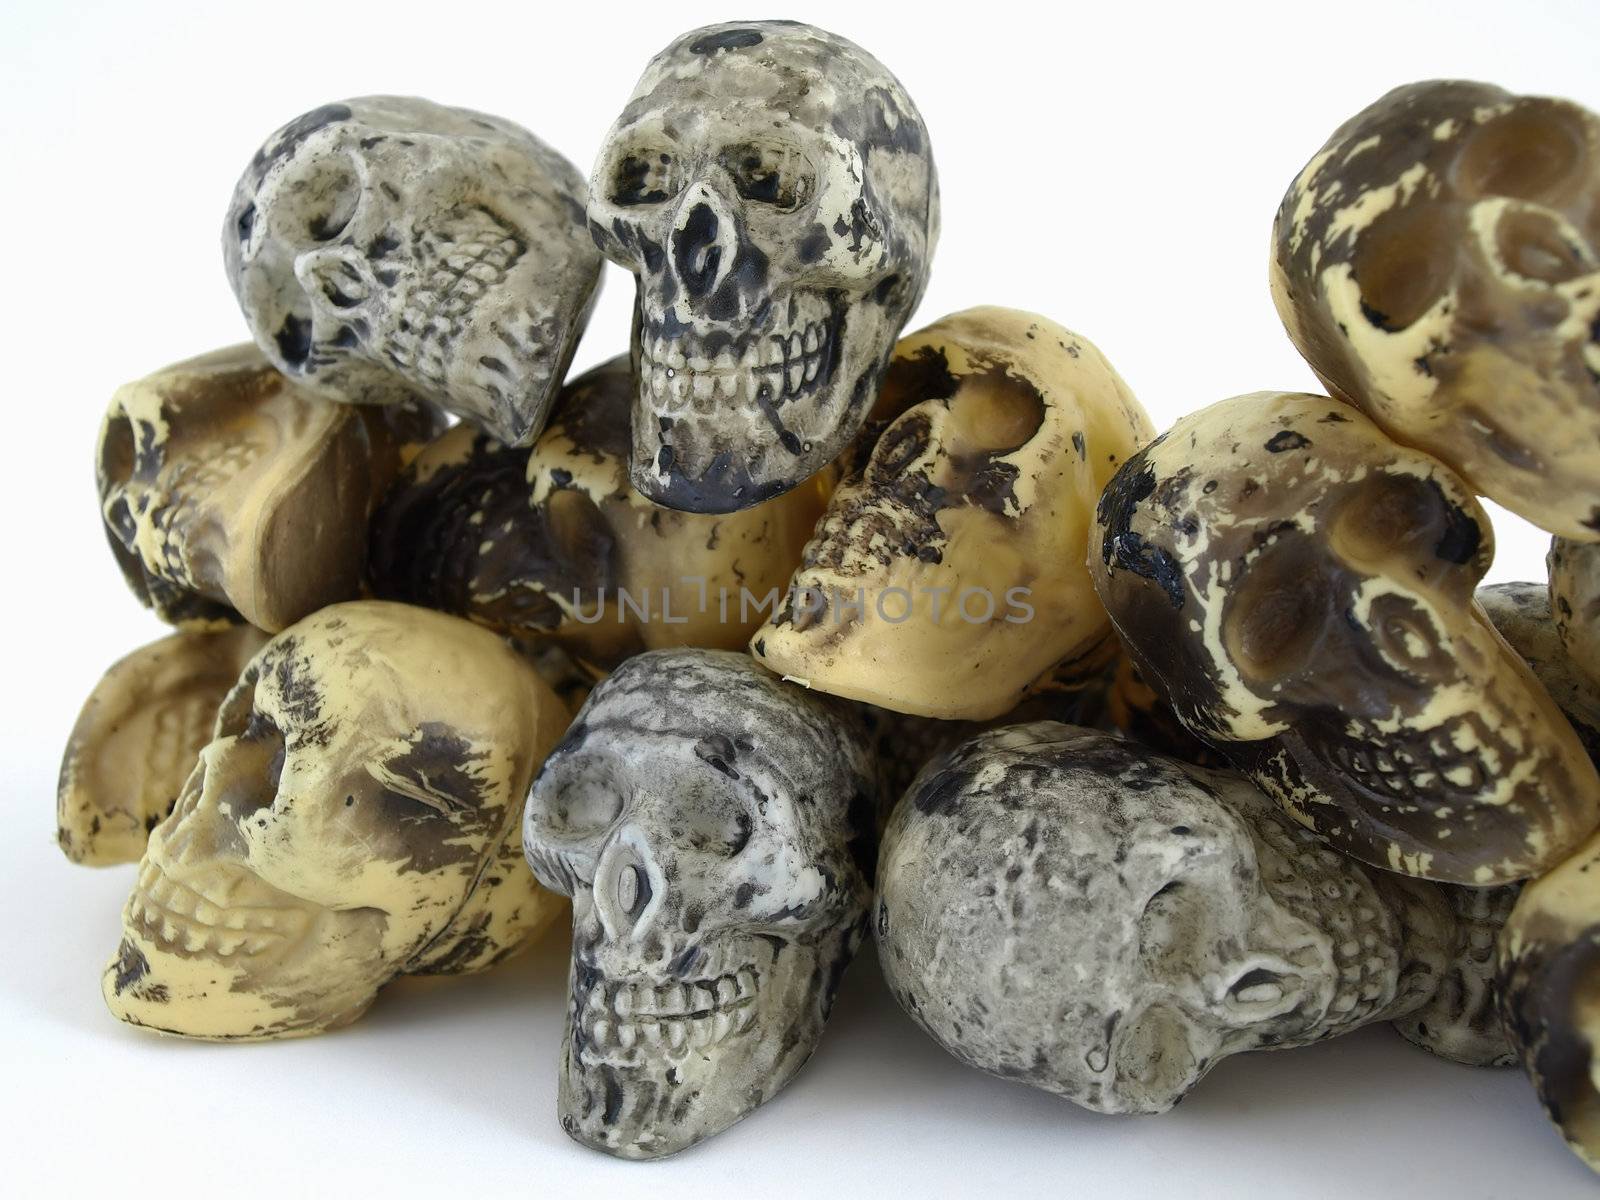 Toy Skulls in a Pile by RGebbiePhoto